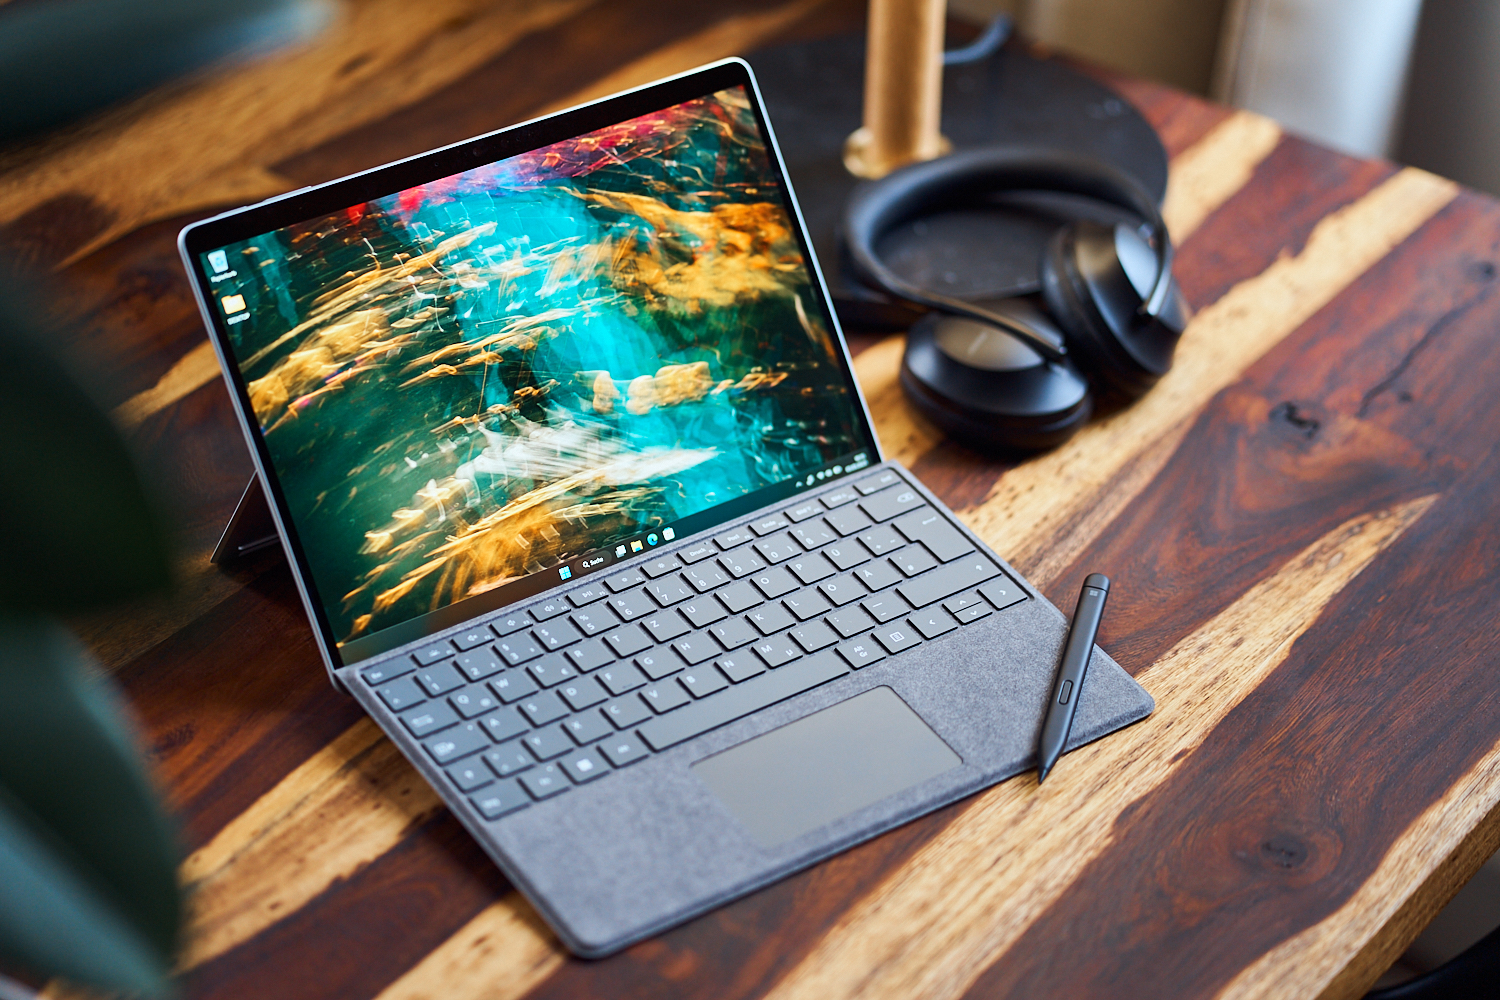 Microsoft Surface Pro 9 sale: Our favorite 2-in-1 laptop is $300 off